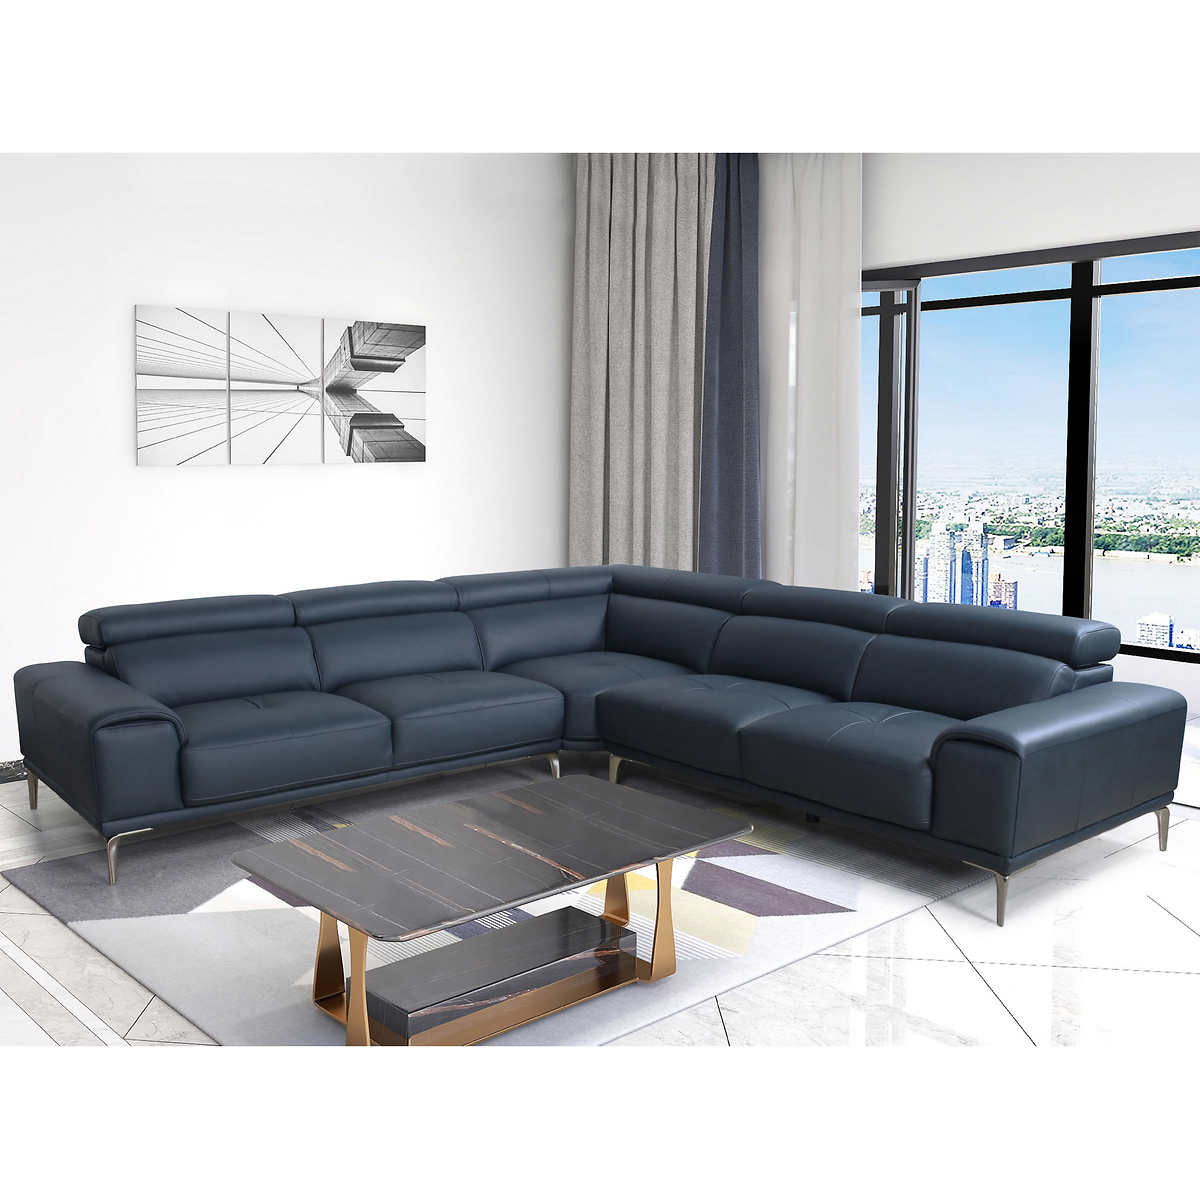 Quinton Top Grain Leather Sectional, Navy Blue Genuine Leather Sectional Sofa